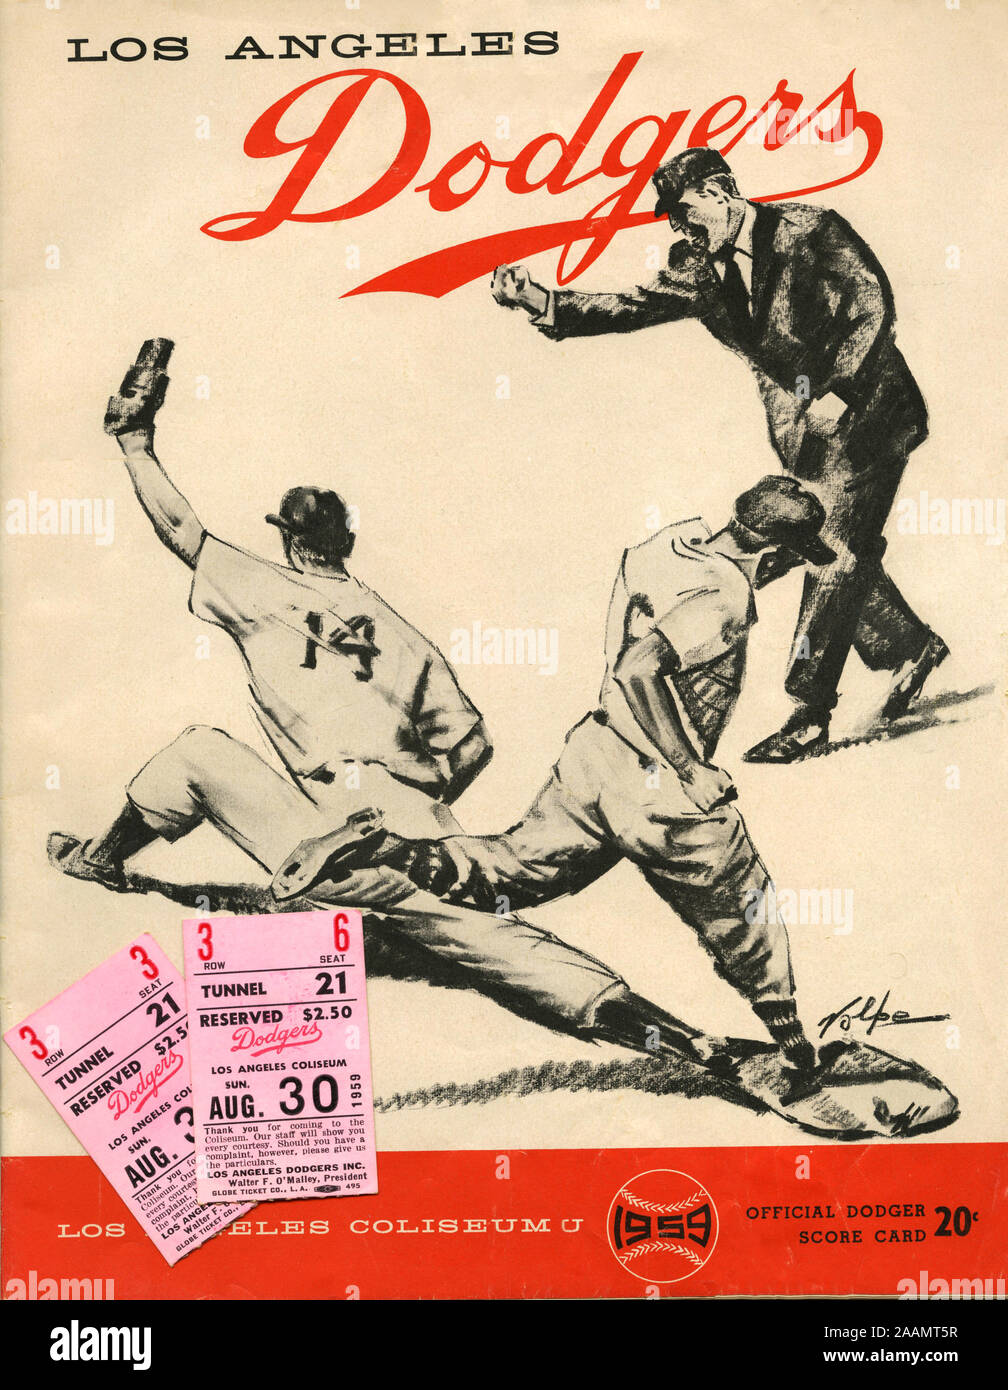 A 1959 souvenir program and tickets for a Los Angeles Dodgers game